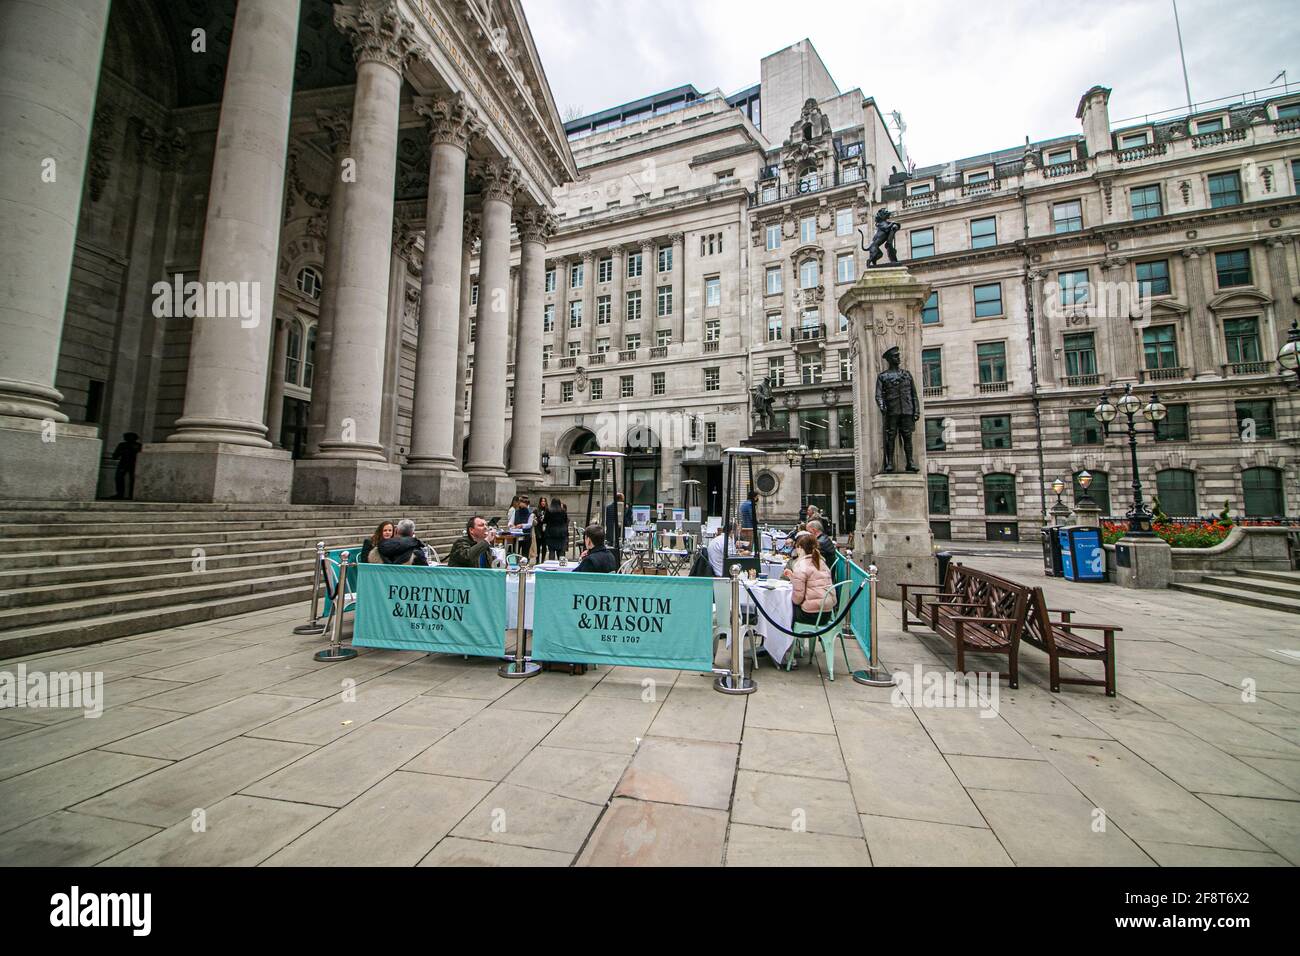 BANK LONDON, UK. 15th Apr, 2021. People are being served food and drink at Fortnum and Mason in Bank financial district offering al fresco dining following the UK government's easing of lockdown restrictions which allowed non-essential businesses to reopen since Monday 12 April. Credit: amer ghazzal/Alamy Live News Stock Photo